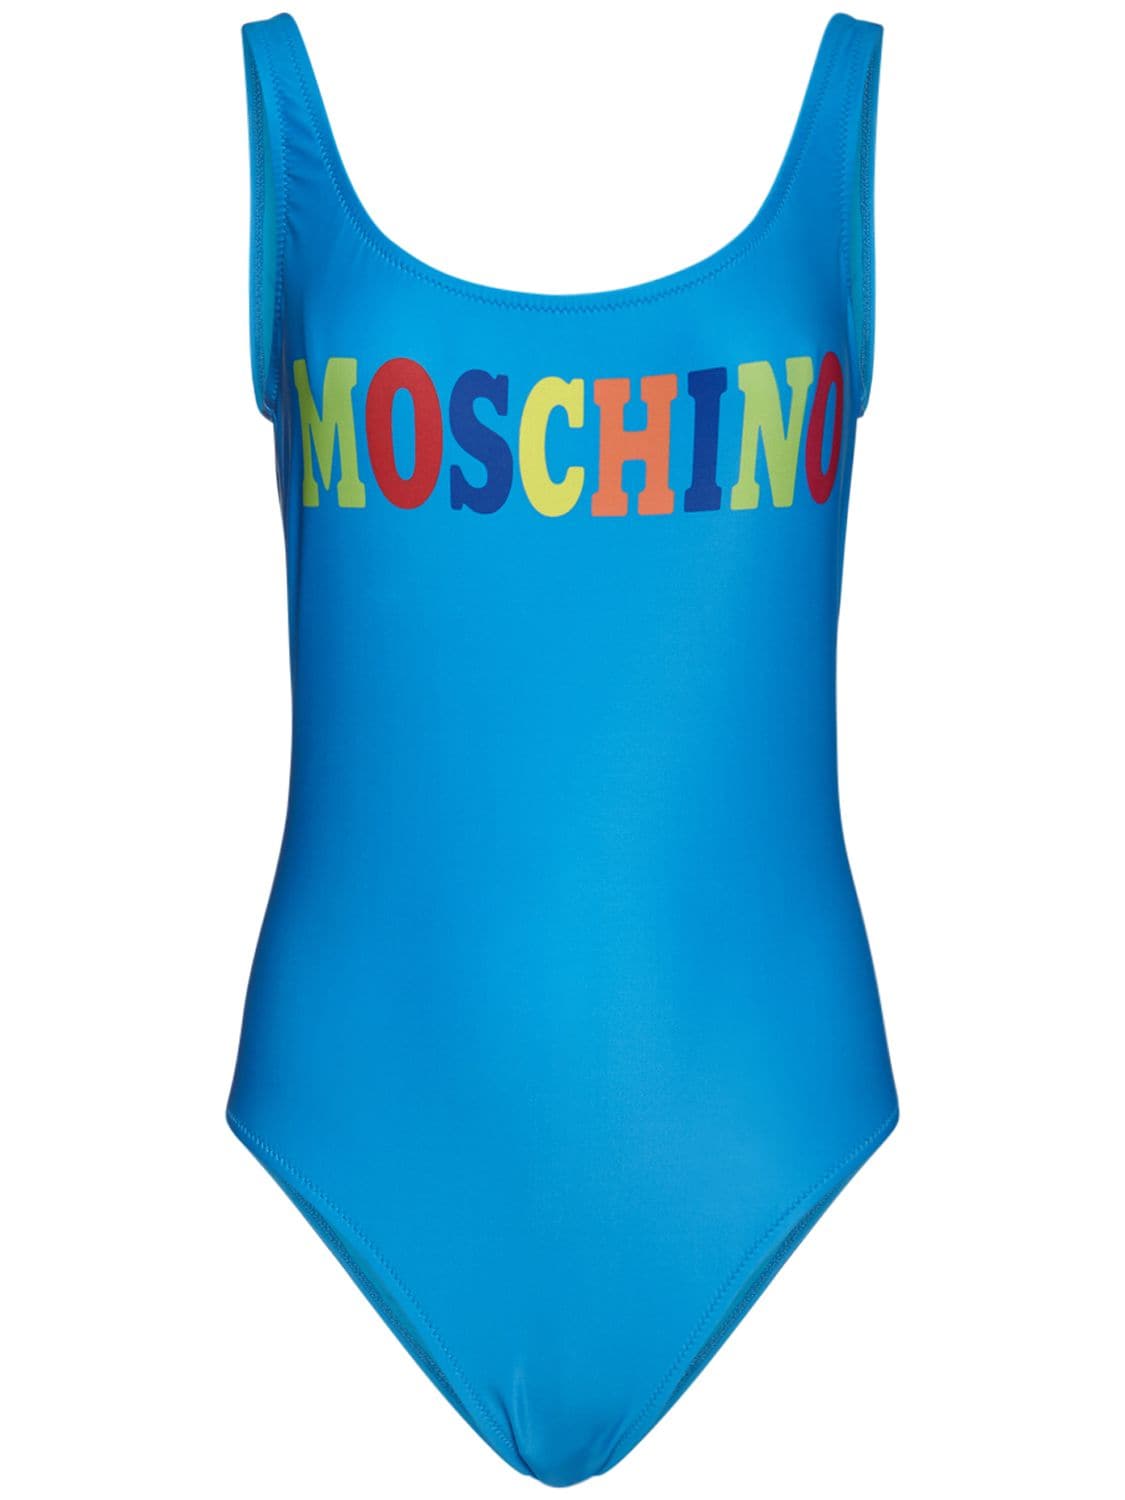 Moschino Multicolour Logo One-piece Swimsuit In Blue | ModeSens